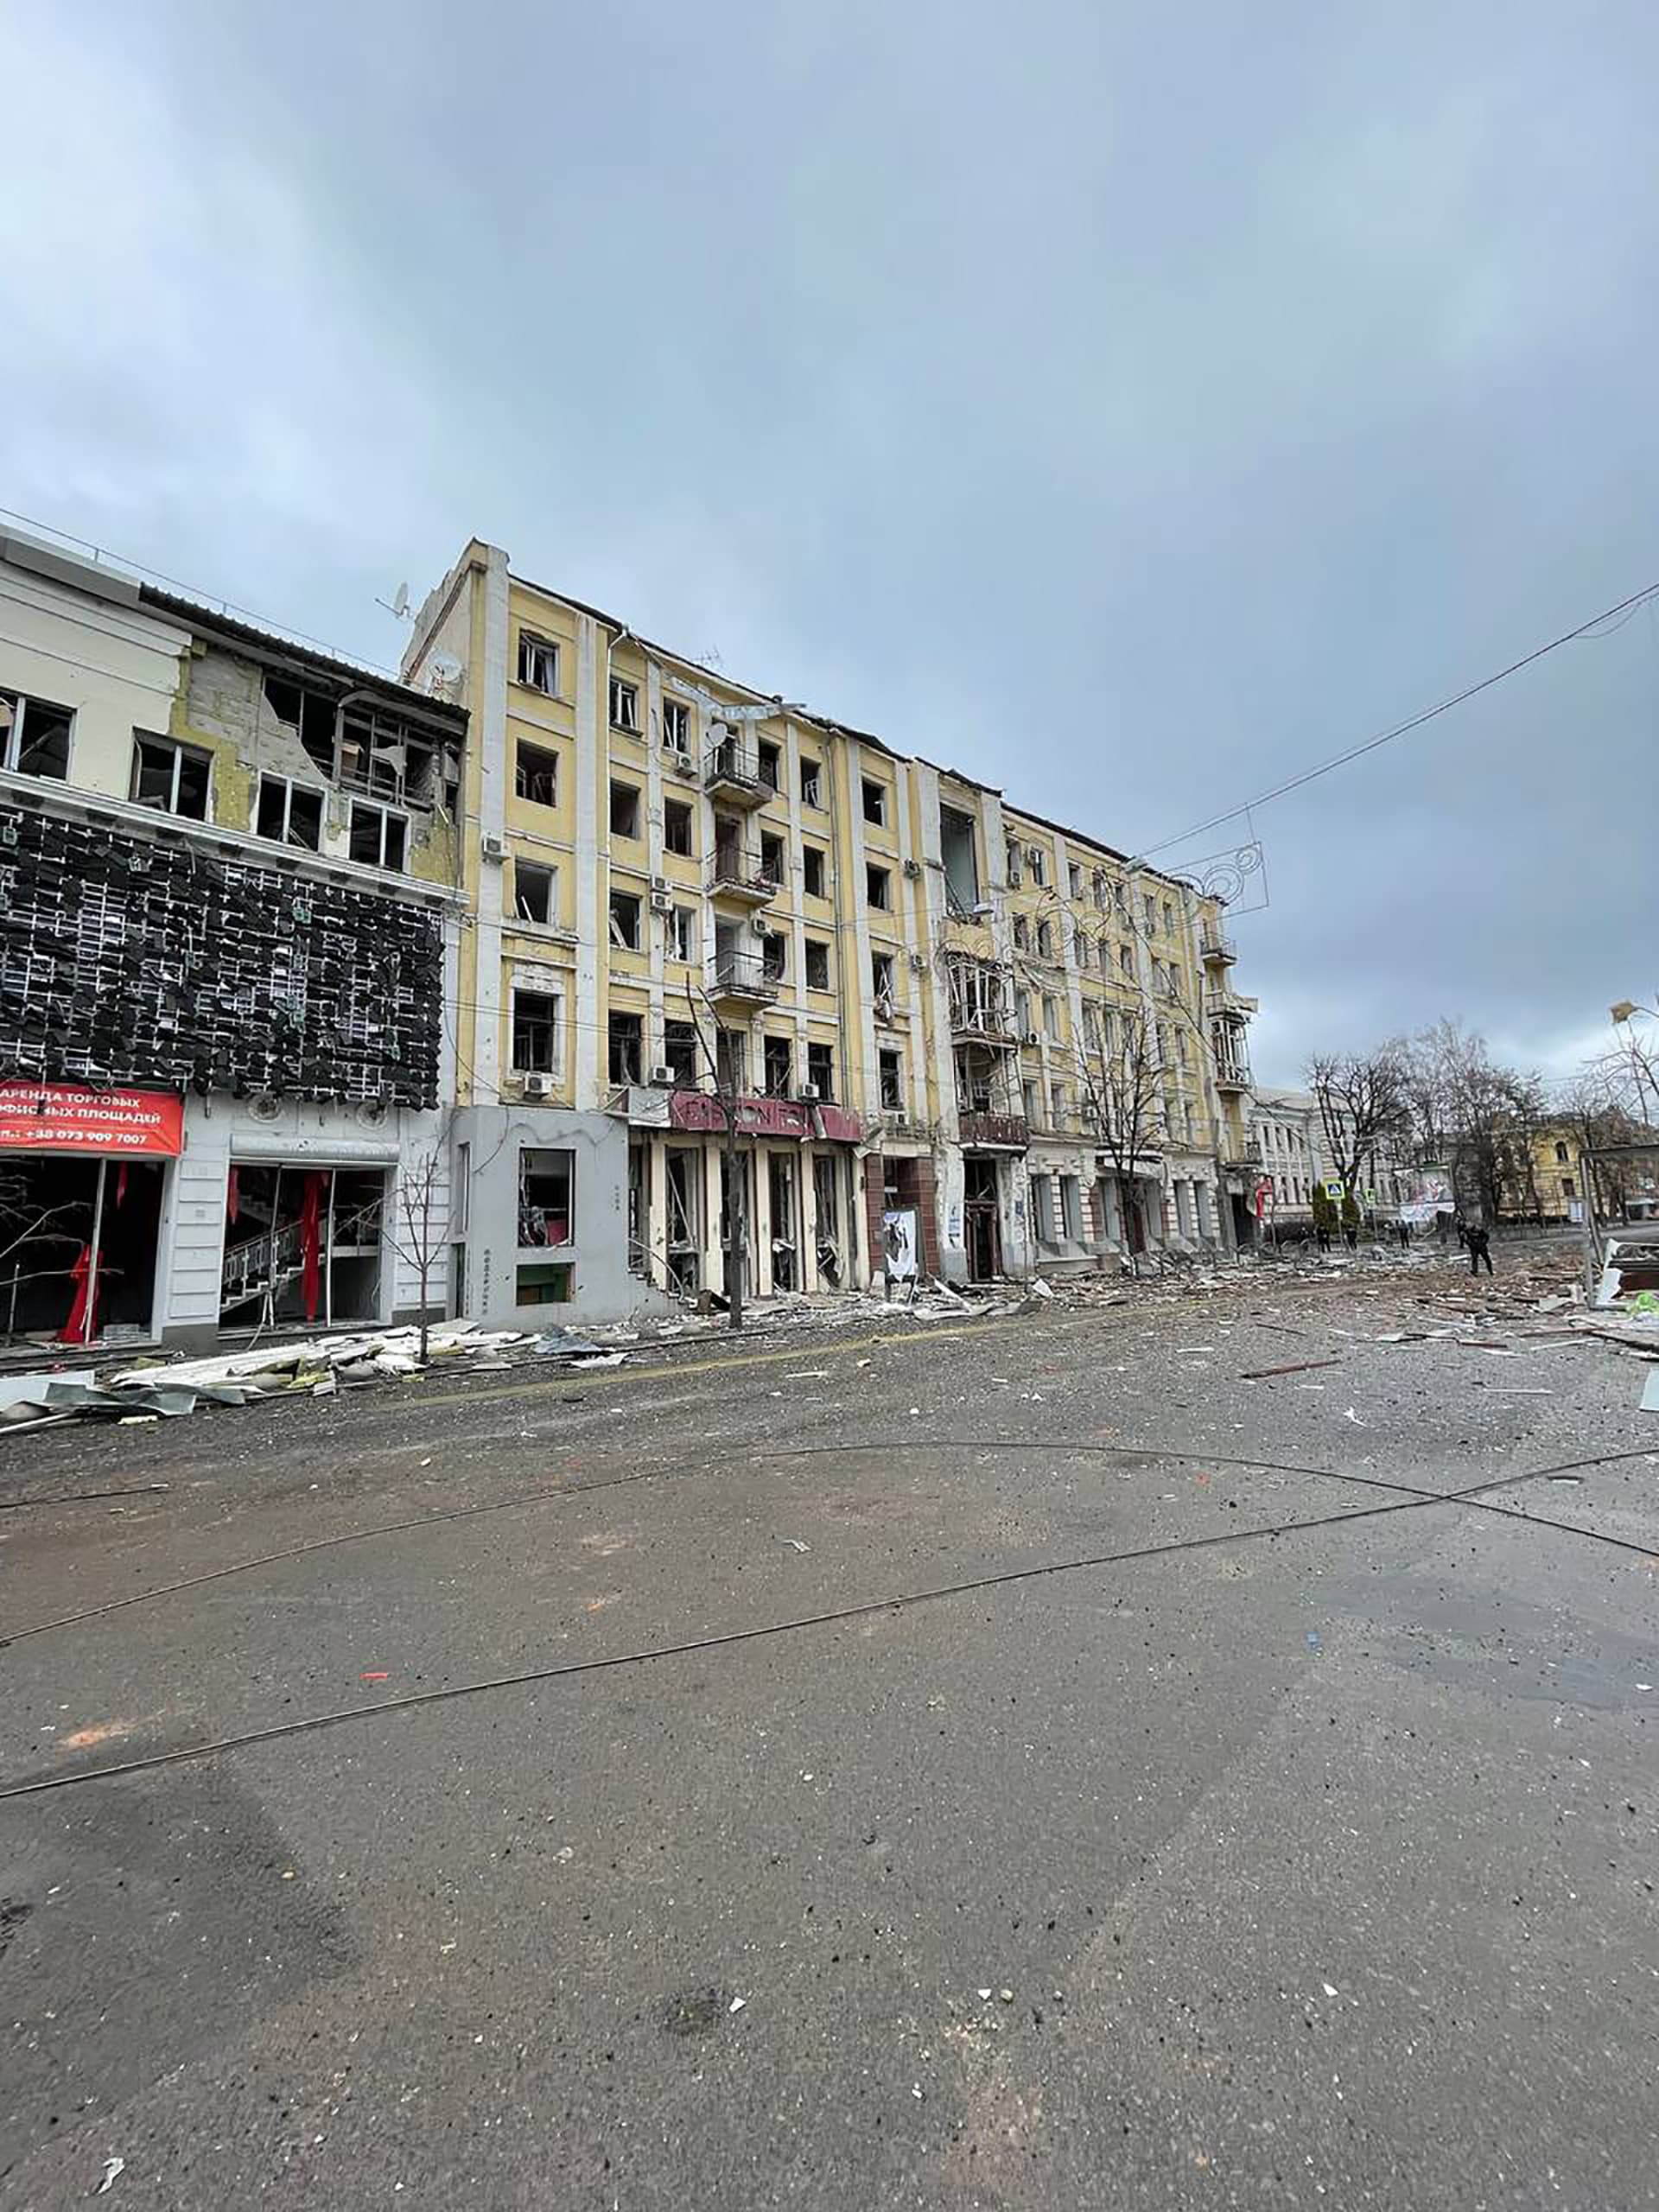 Destroyed buildings on the streets of Kharkiv